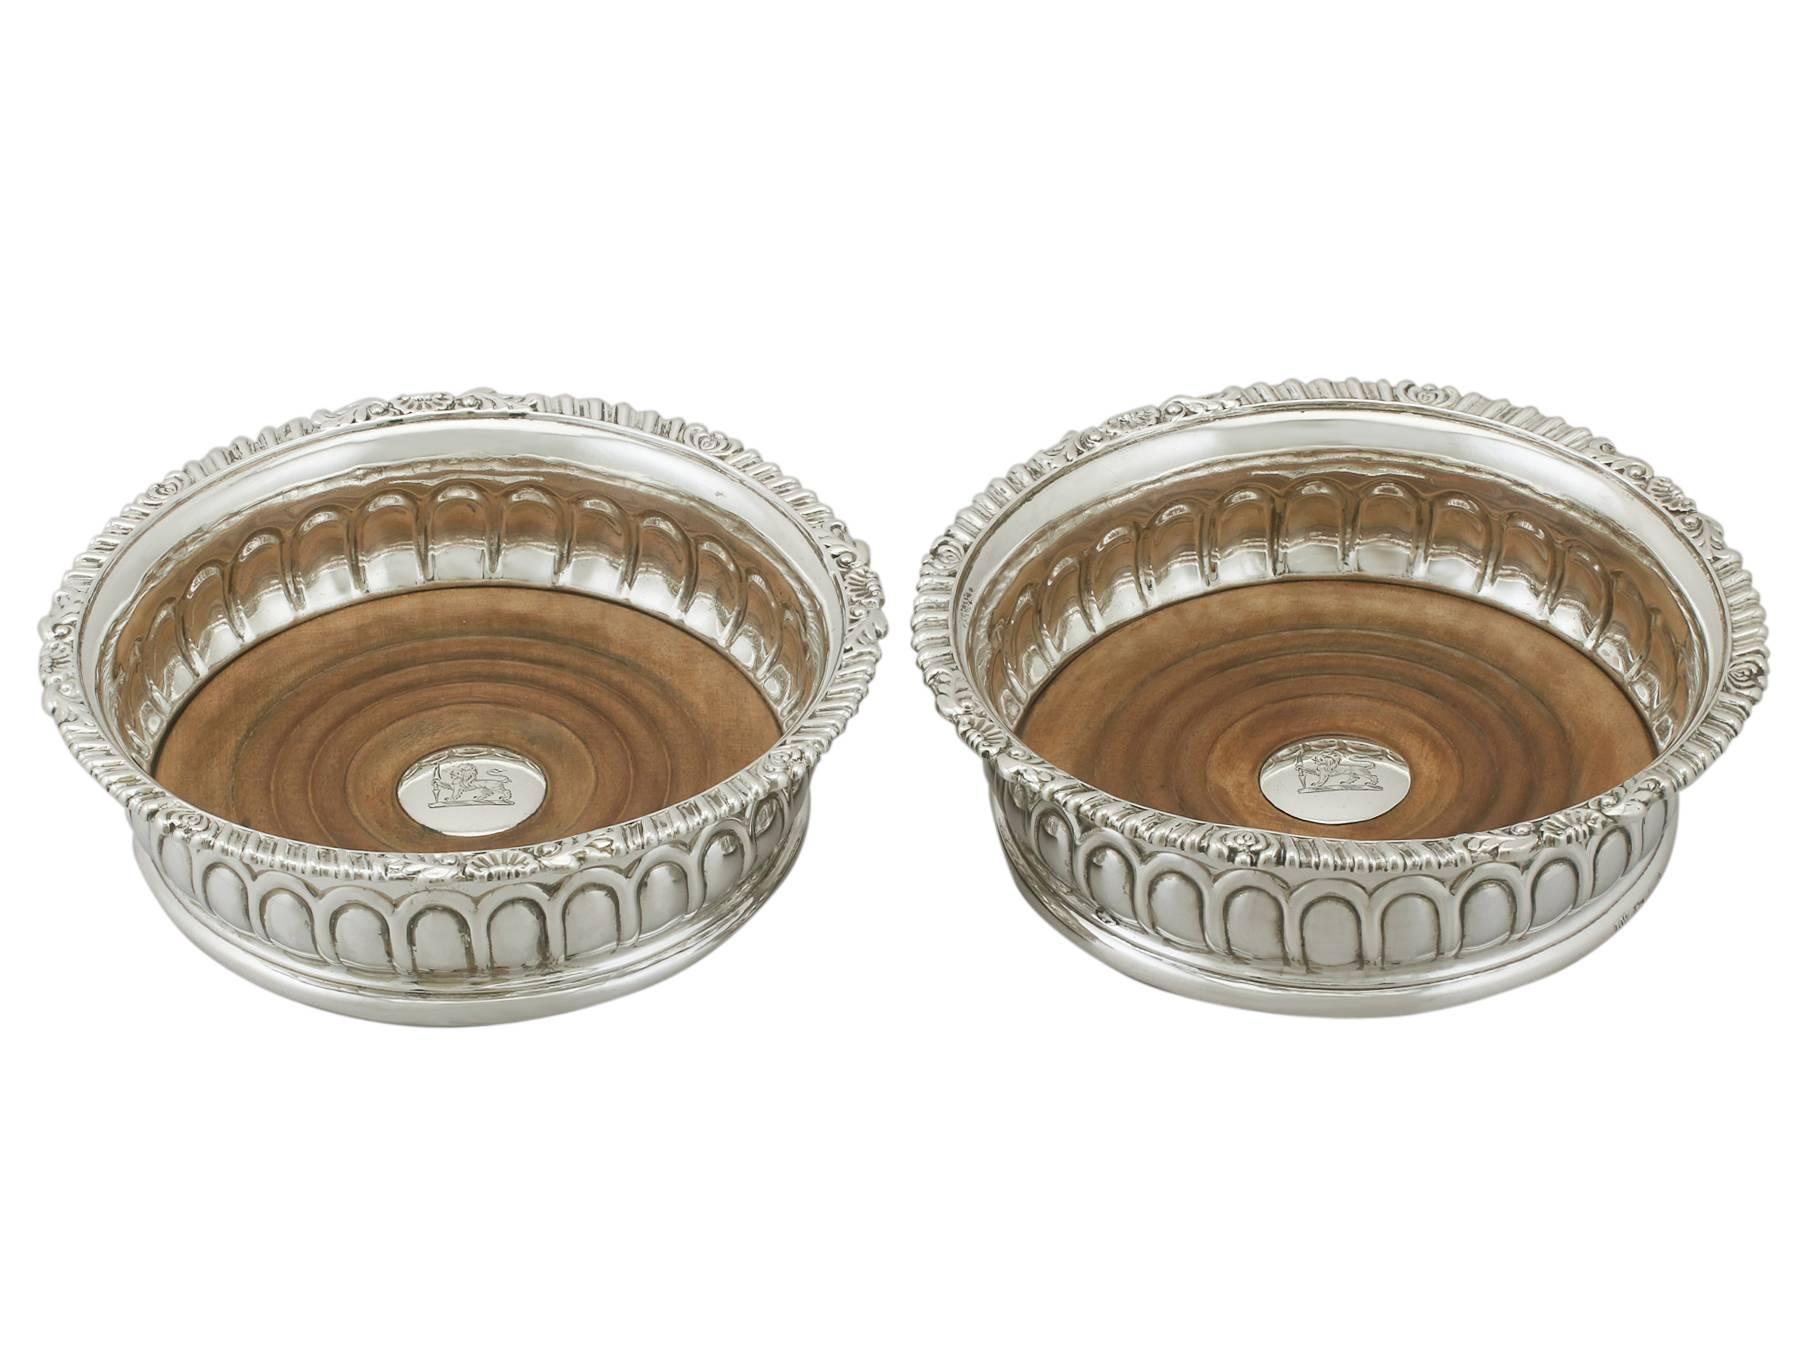 An exceptional, fine and impressive pair of antique George III English sterling silver coasters made by James Watson & Son; an addition to our range of collectable silverware.

These exceptional antique George III sterling silver wine coasters